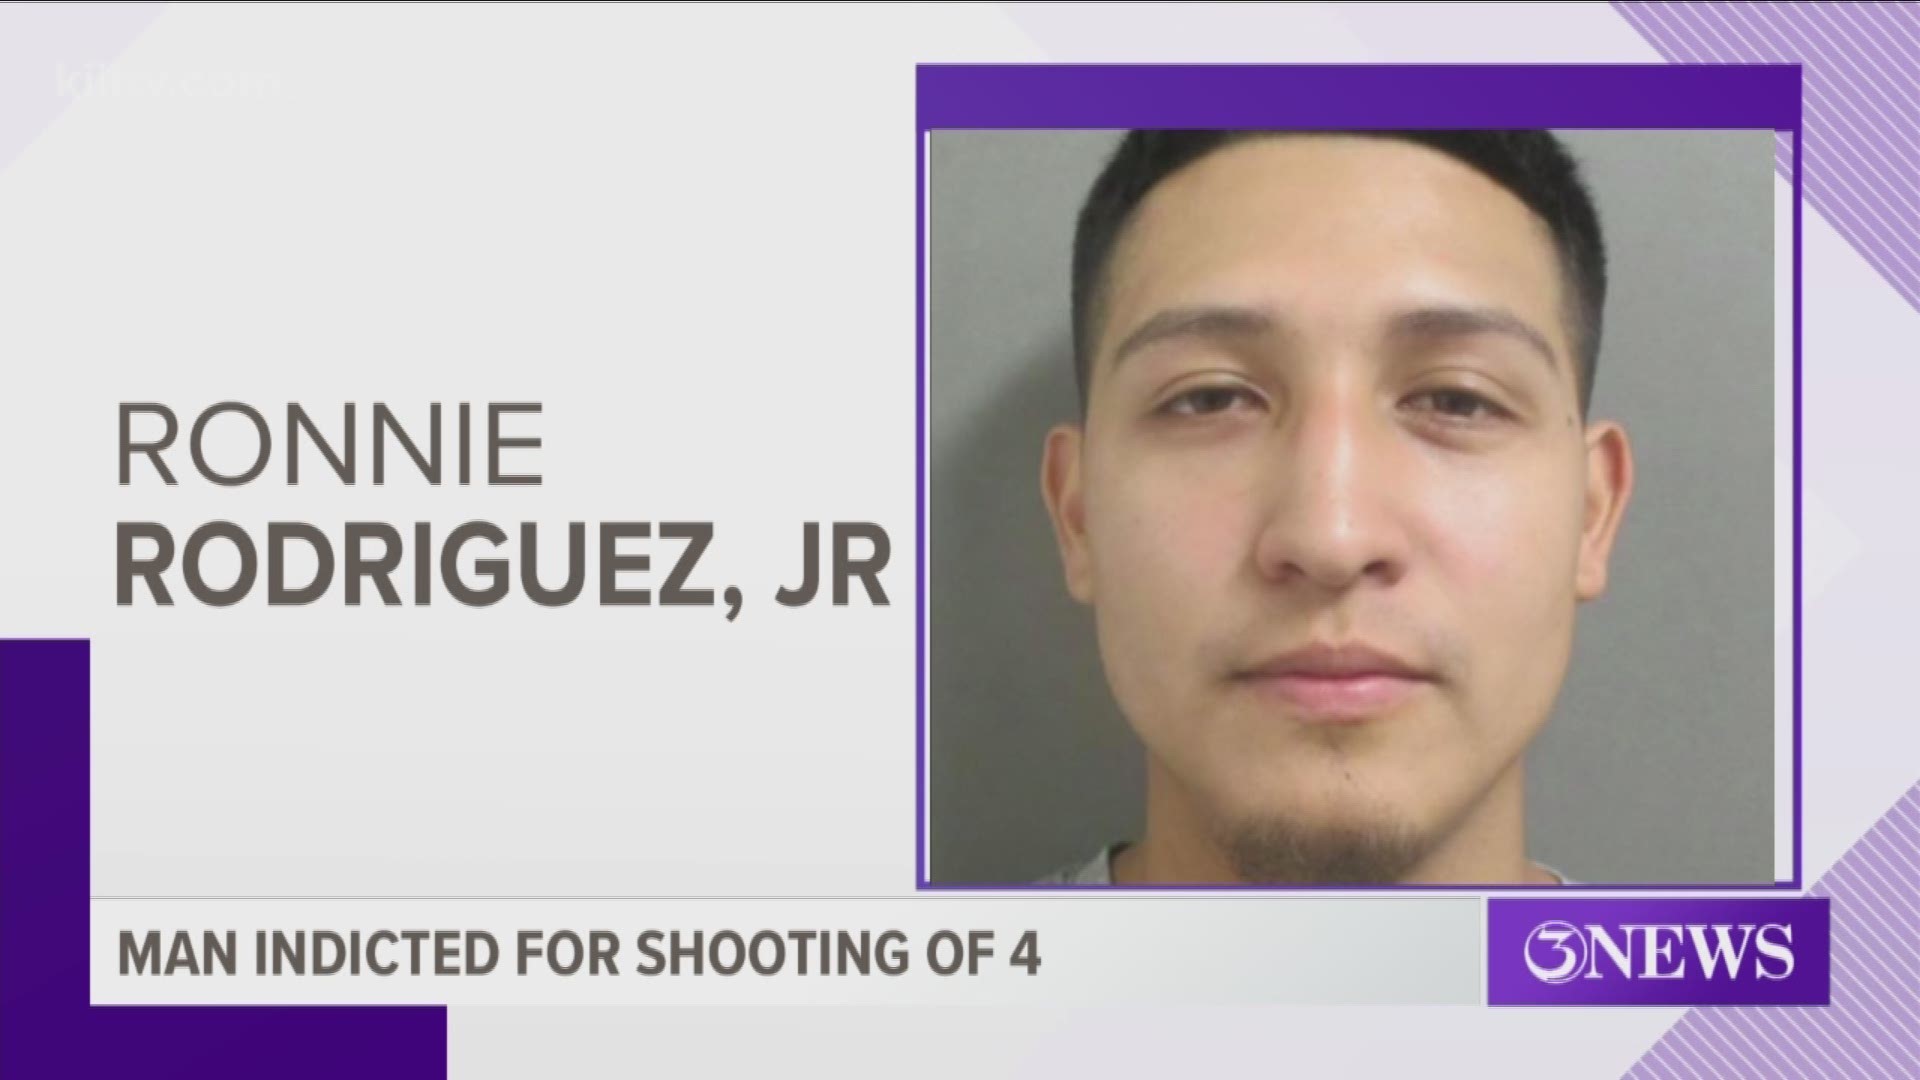 A grand jury in San Patricio County handed down an indictment Friday for a man arrested in connection with a shooting at a one-year-old's birthday party in October of last year.